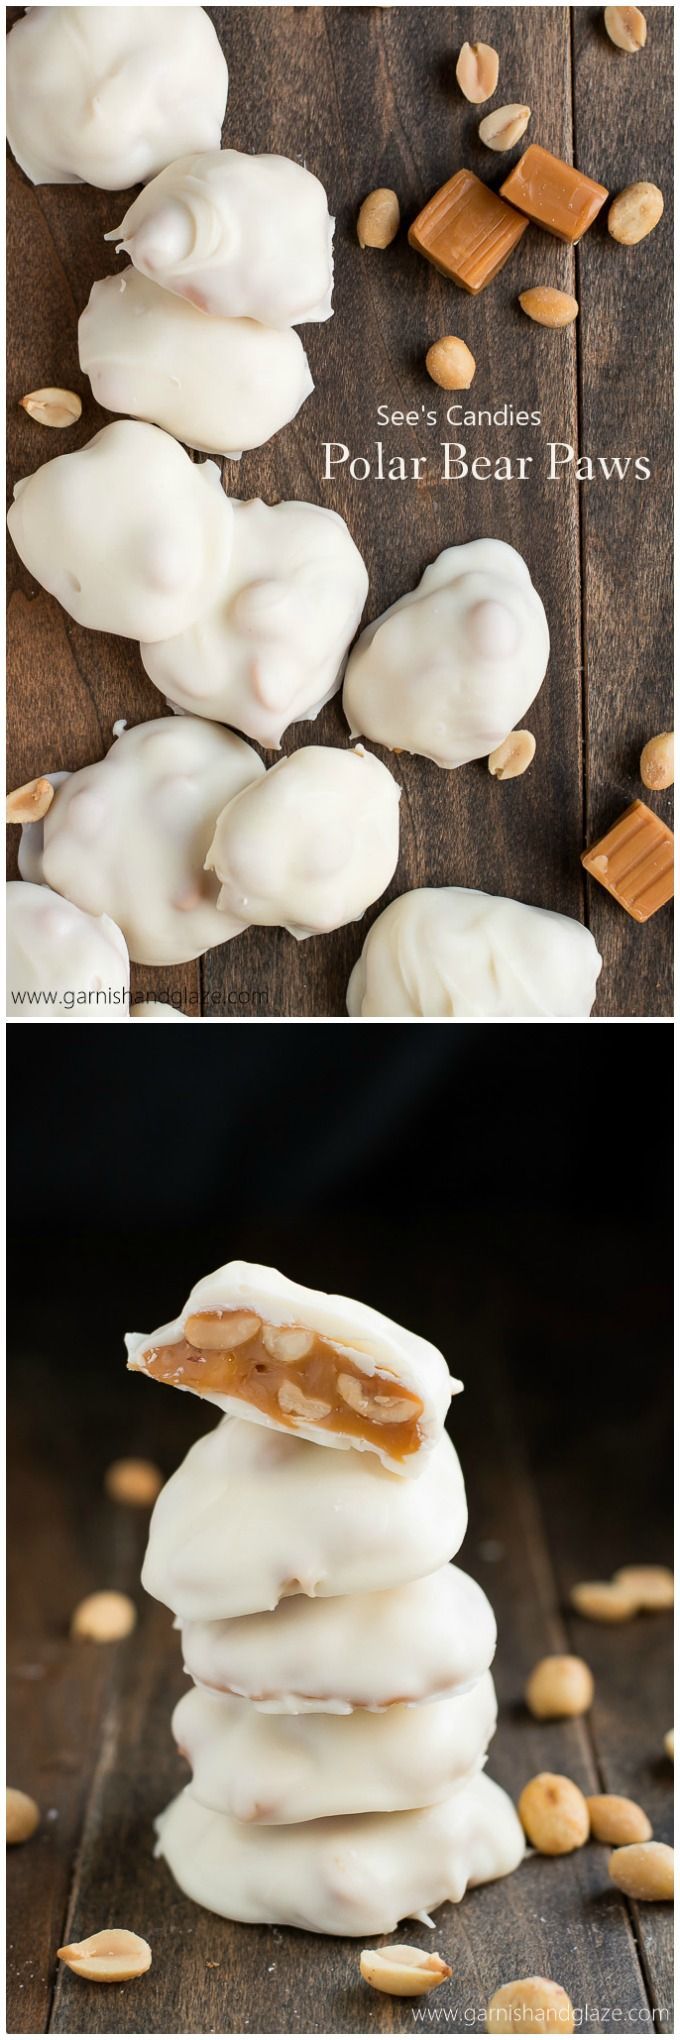 Polar Bear Paws {Sees Candies Copycat} are filled with salty roasted peanuts